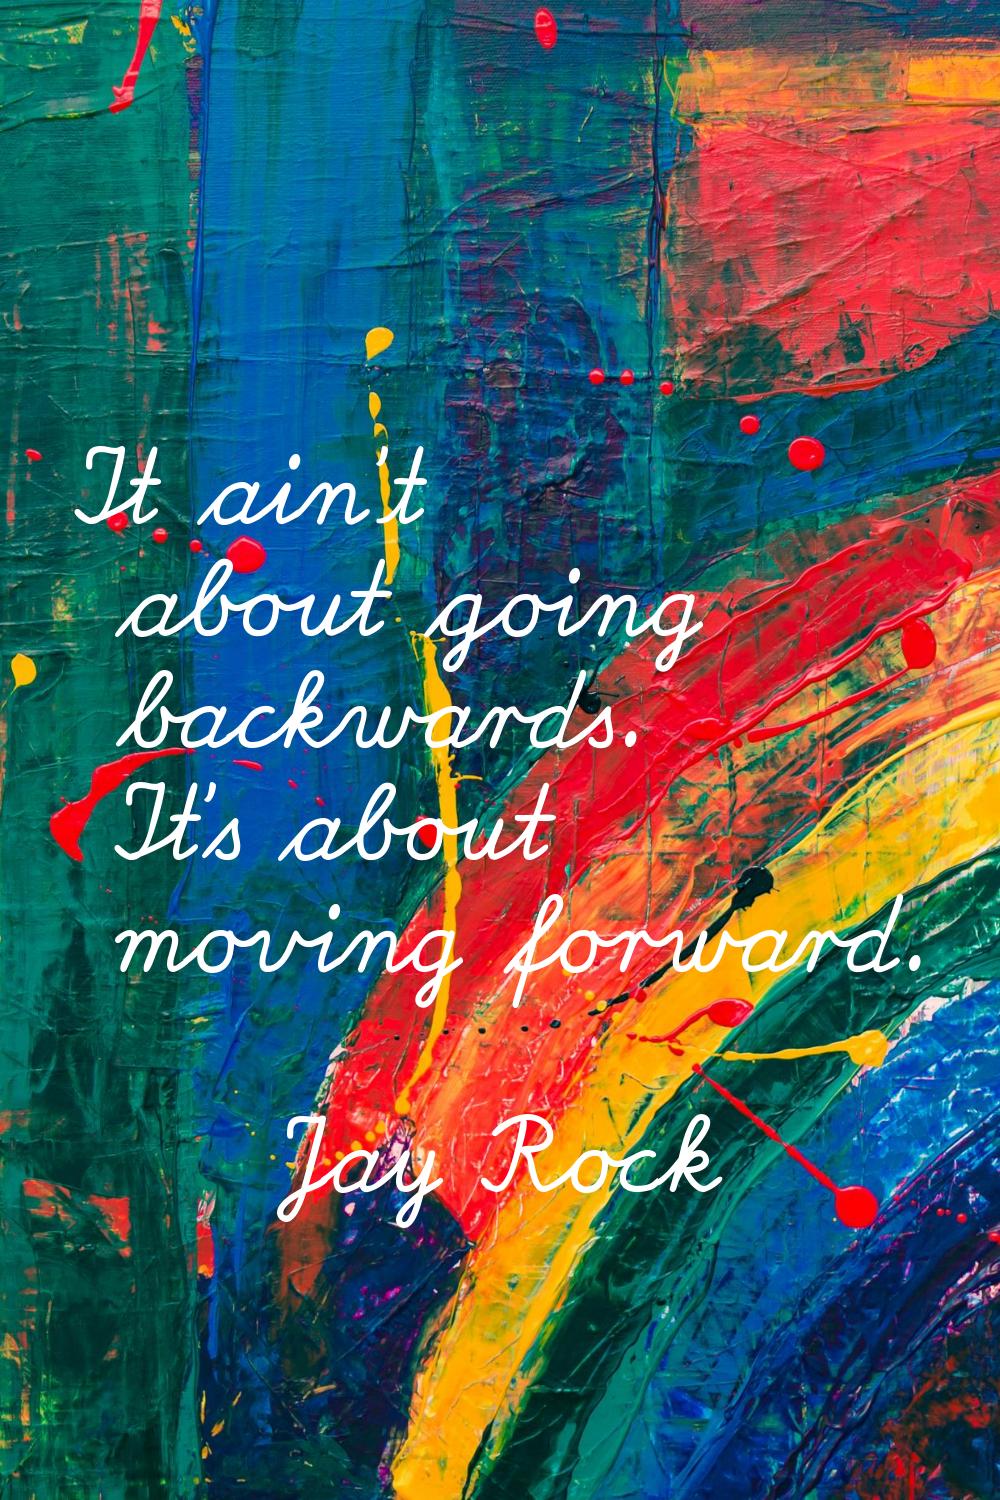 It ain't about going backwards. It's about moving forward.